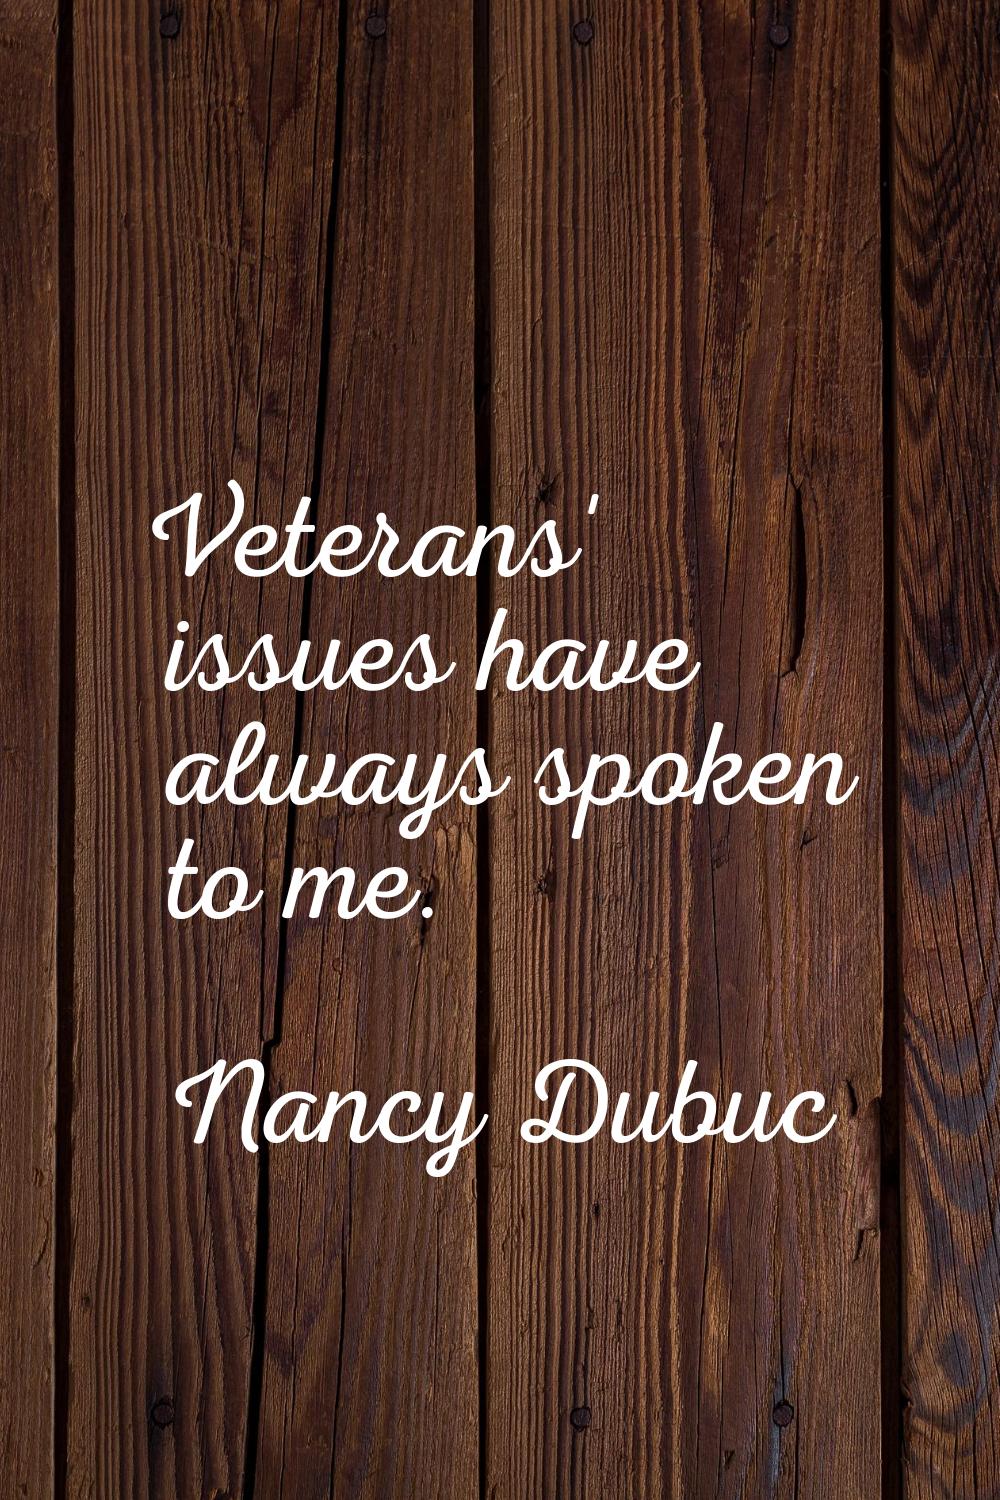 Veterans' issues have always spoken to me.